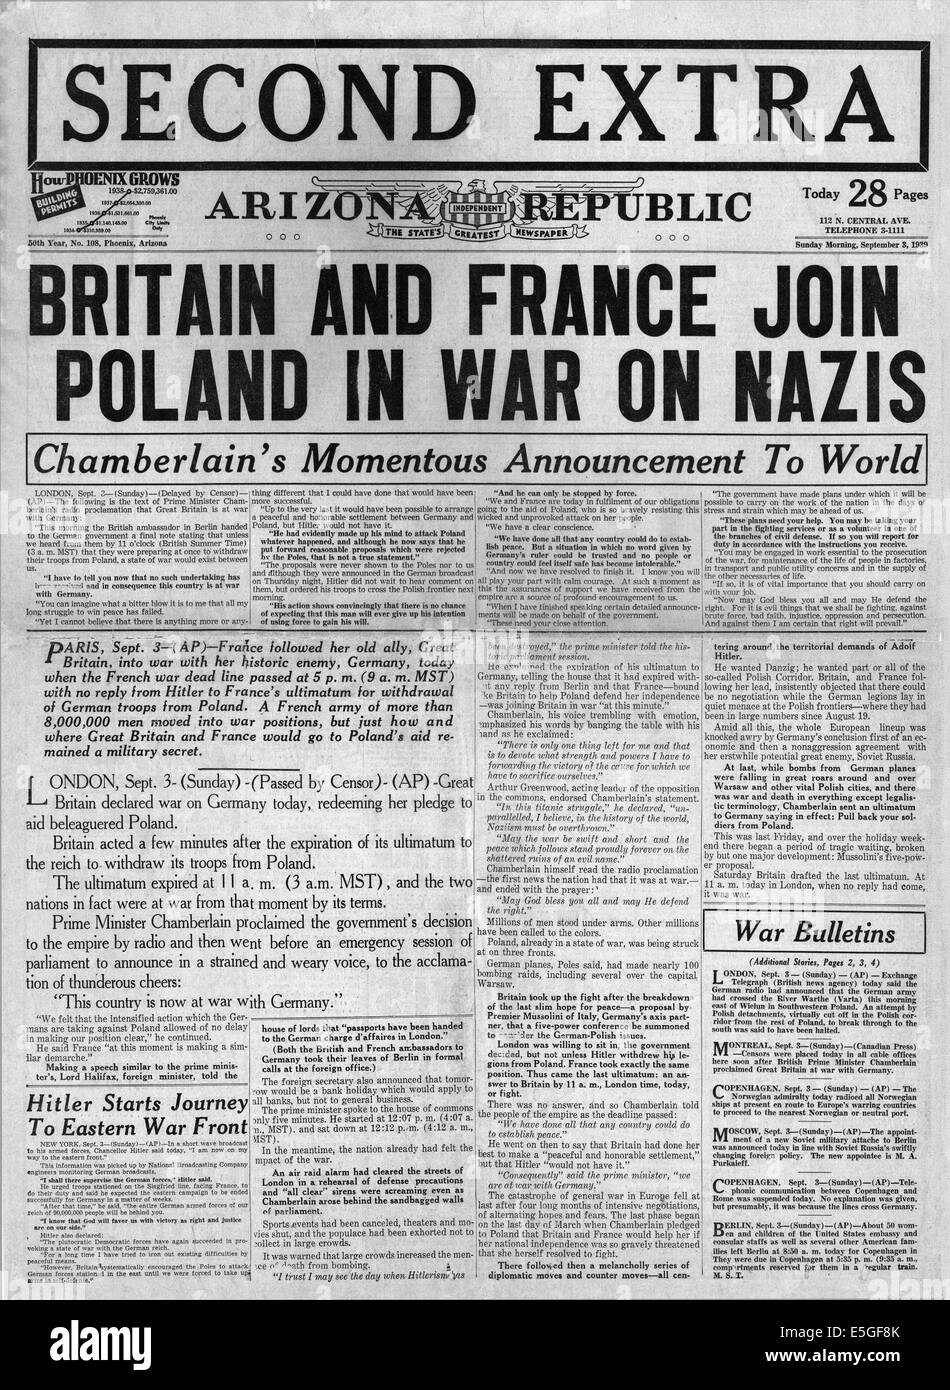 1939 Arizona Republic (USA) front page reporting the declaration of war on Germany by Britain and France Stock Photo